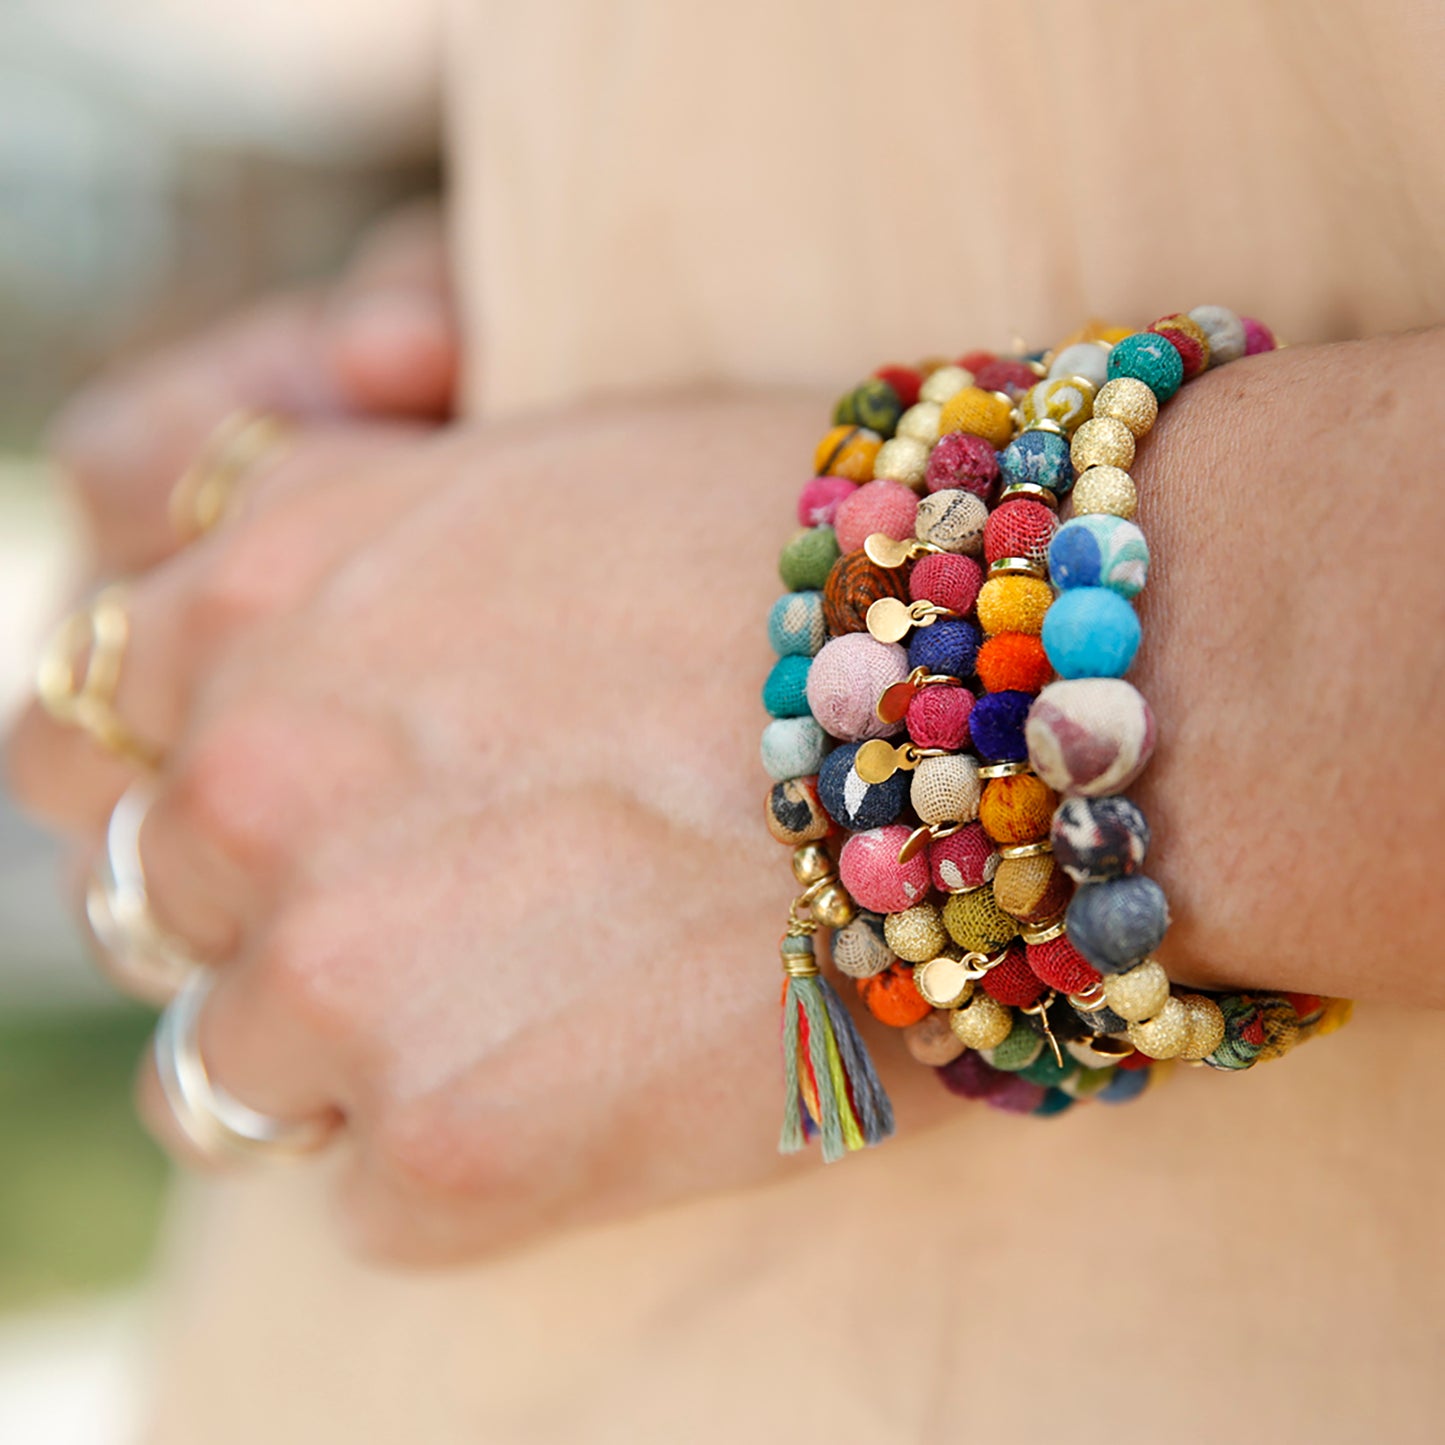 Load image into Gallery viewer, Five multicolored bracelets adorn a wrist.
